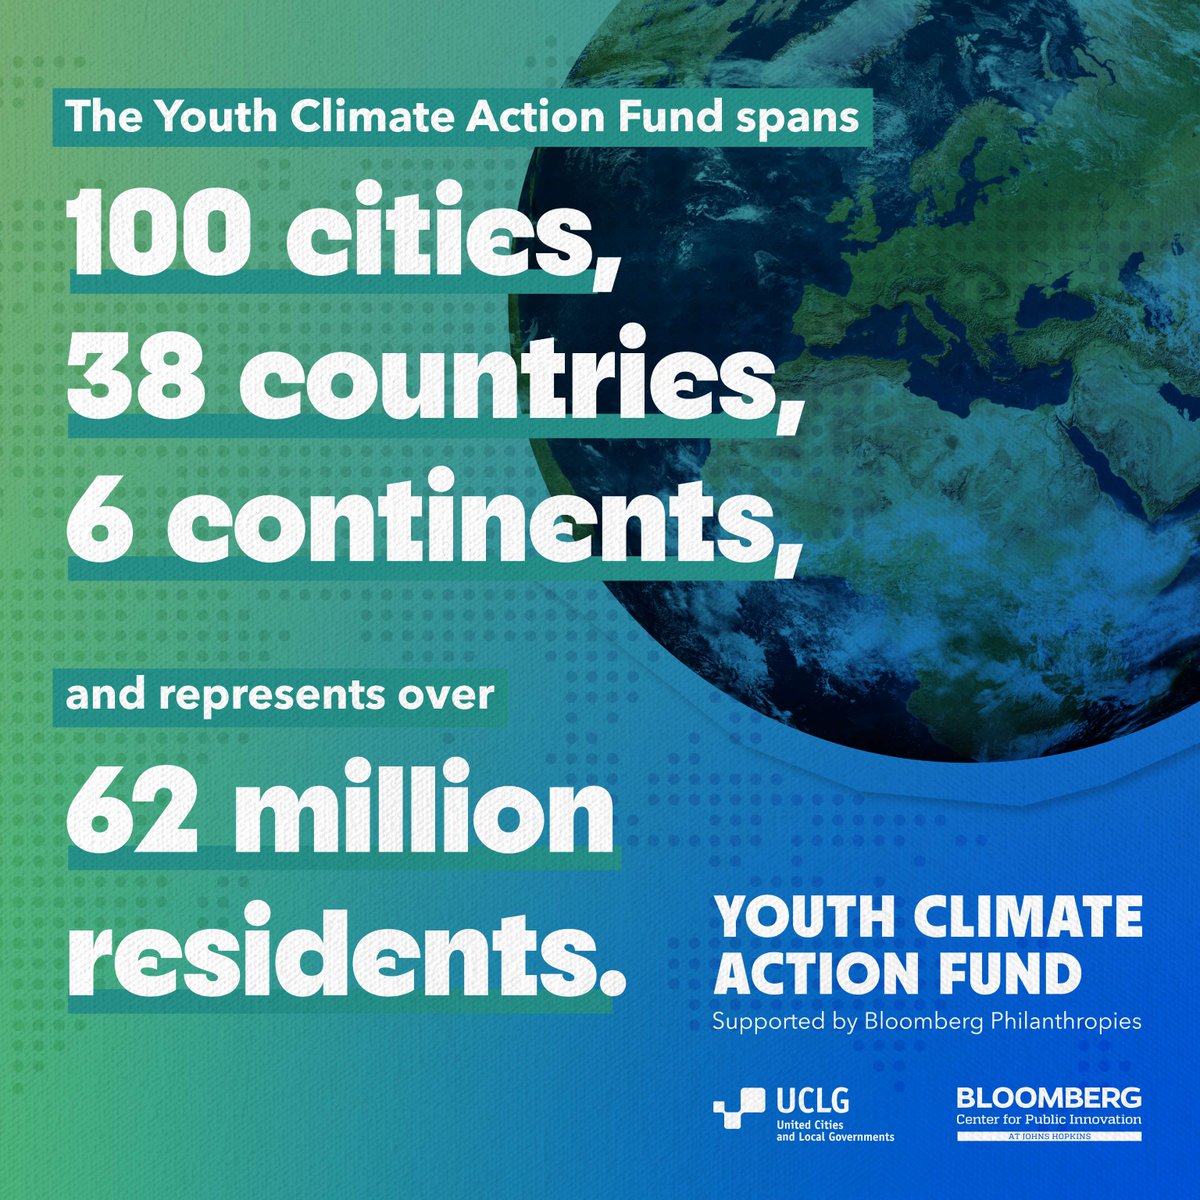 We are thrilled that we will join @BloombergDotOrg's Youth Climate Action Fund. (1/2)